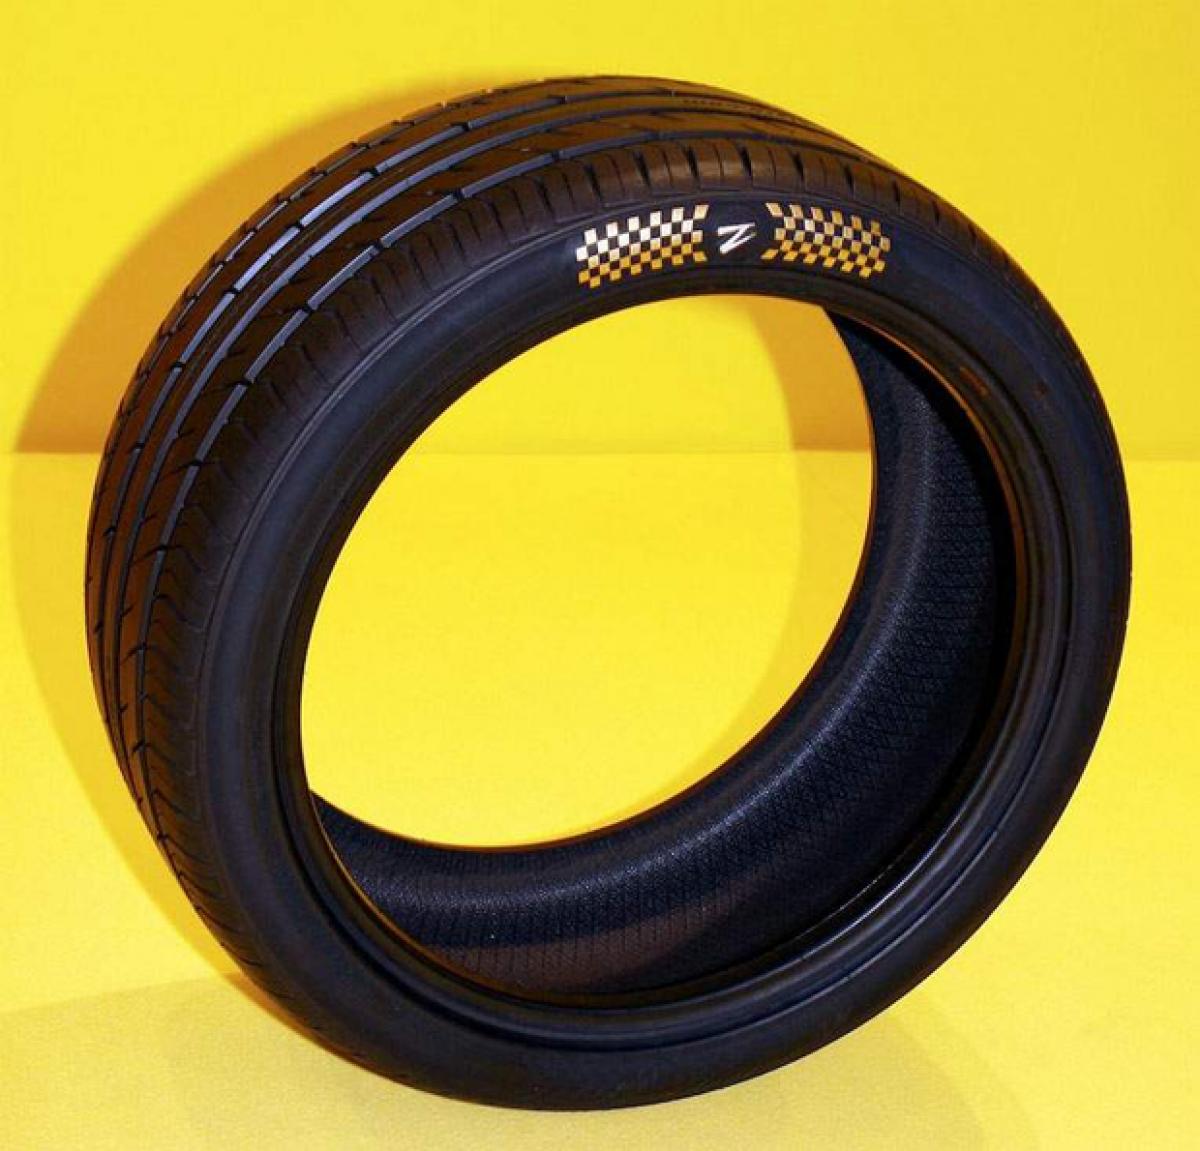 Dont miss: These car tyres cost INR 4.02 crore